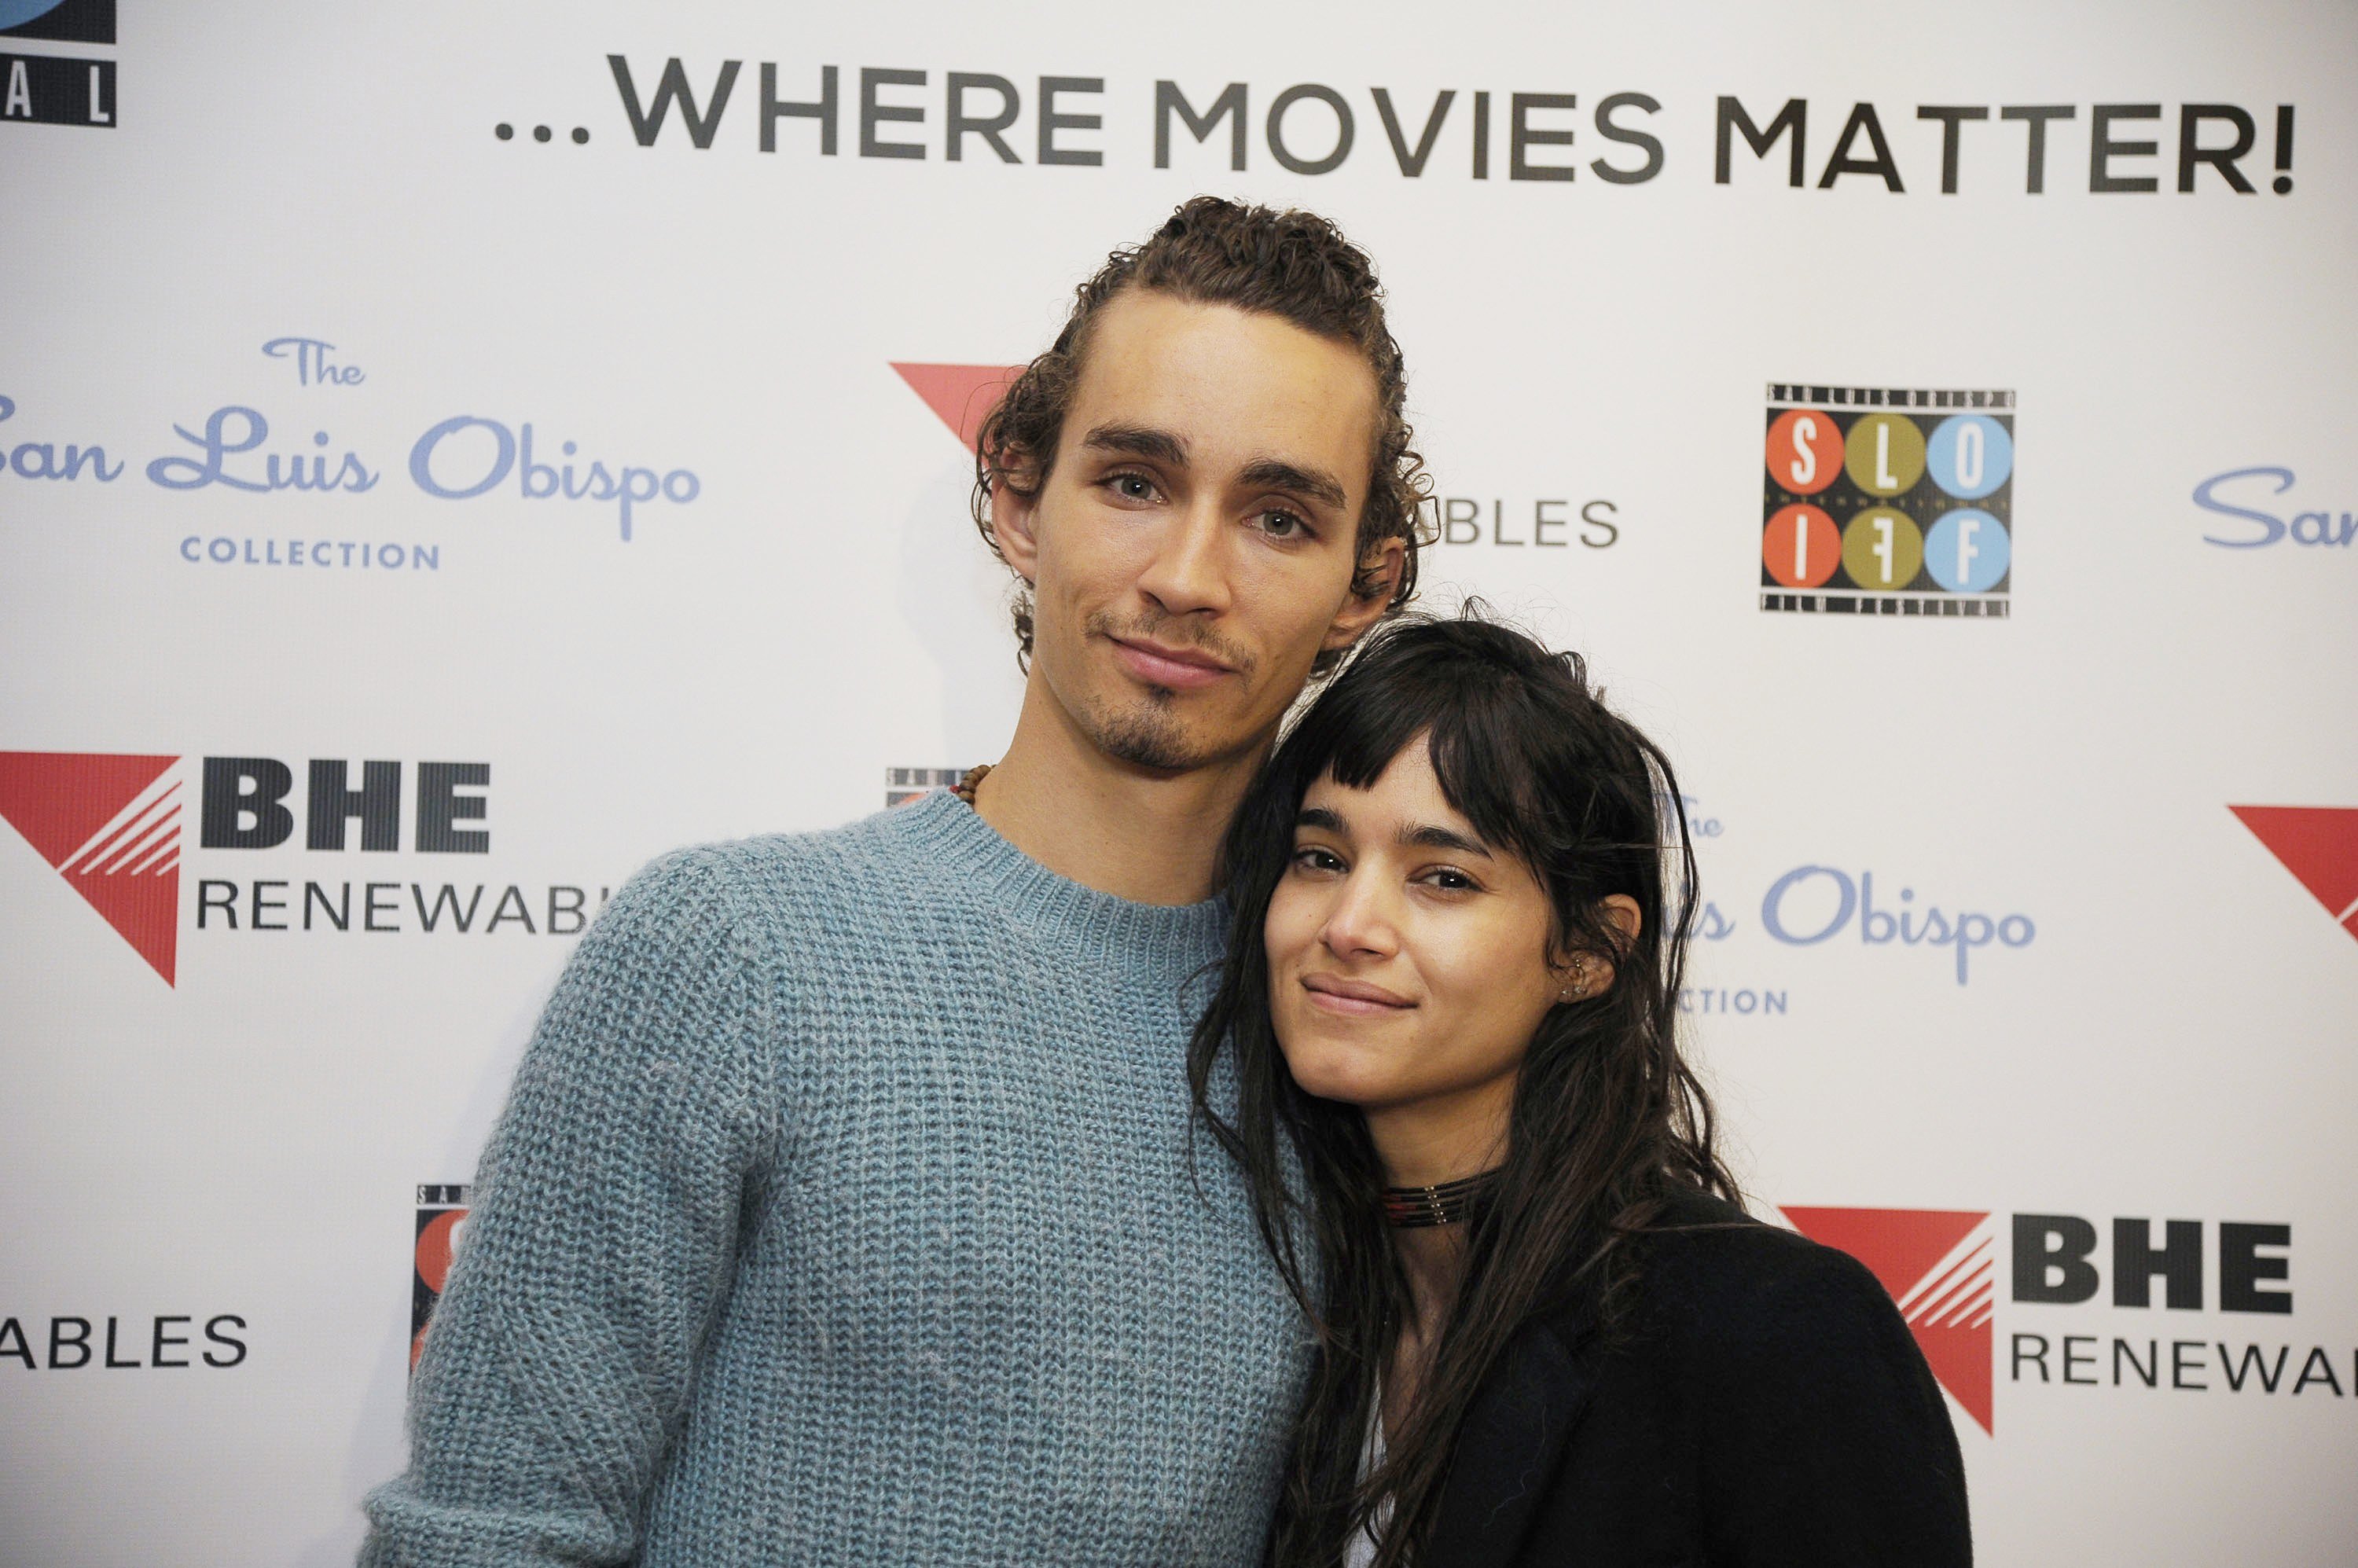 Robert Sheehan and Sofia Boutella attend the 2015 San Luis Obispo International Film Festival at Fremont Theatre on March 10, 2015, in San Luis Obispo, California. | Source: Getty Images